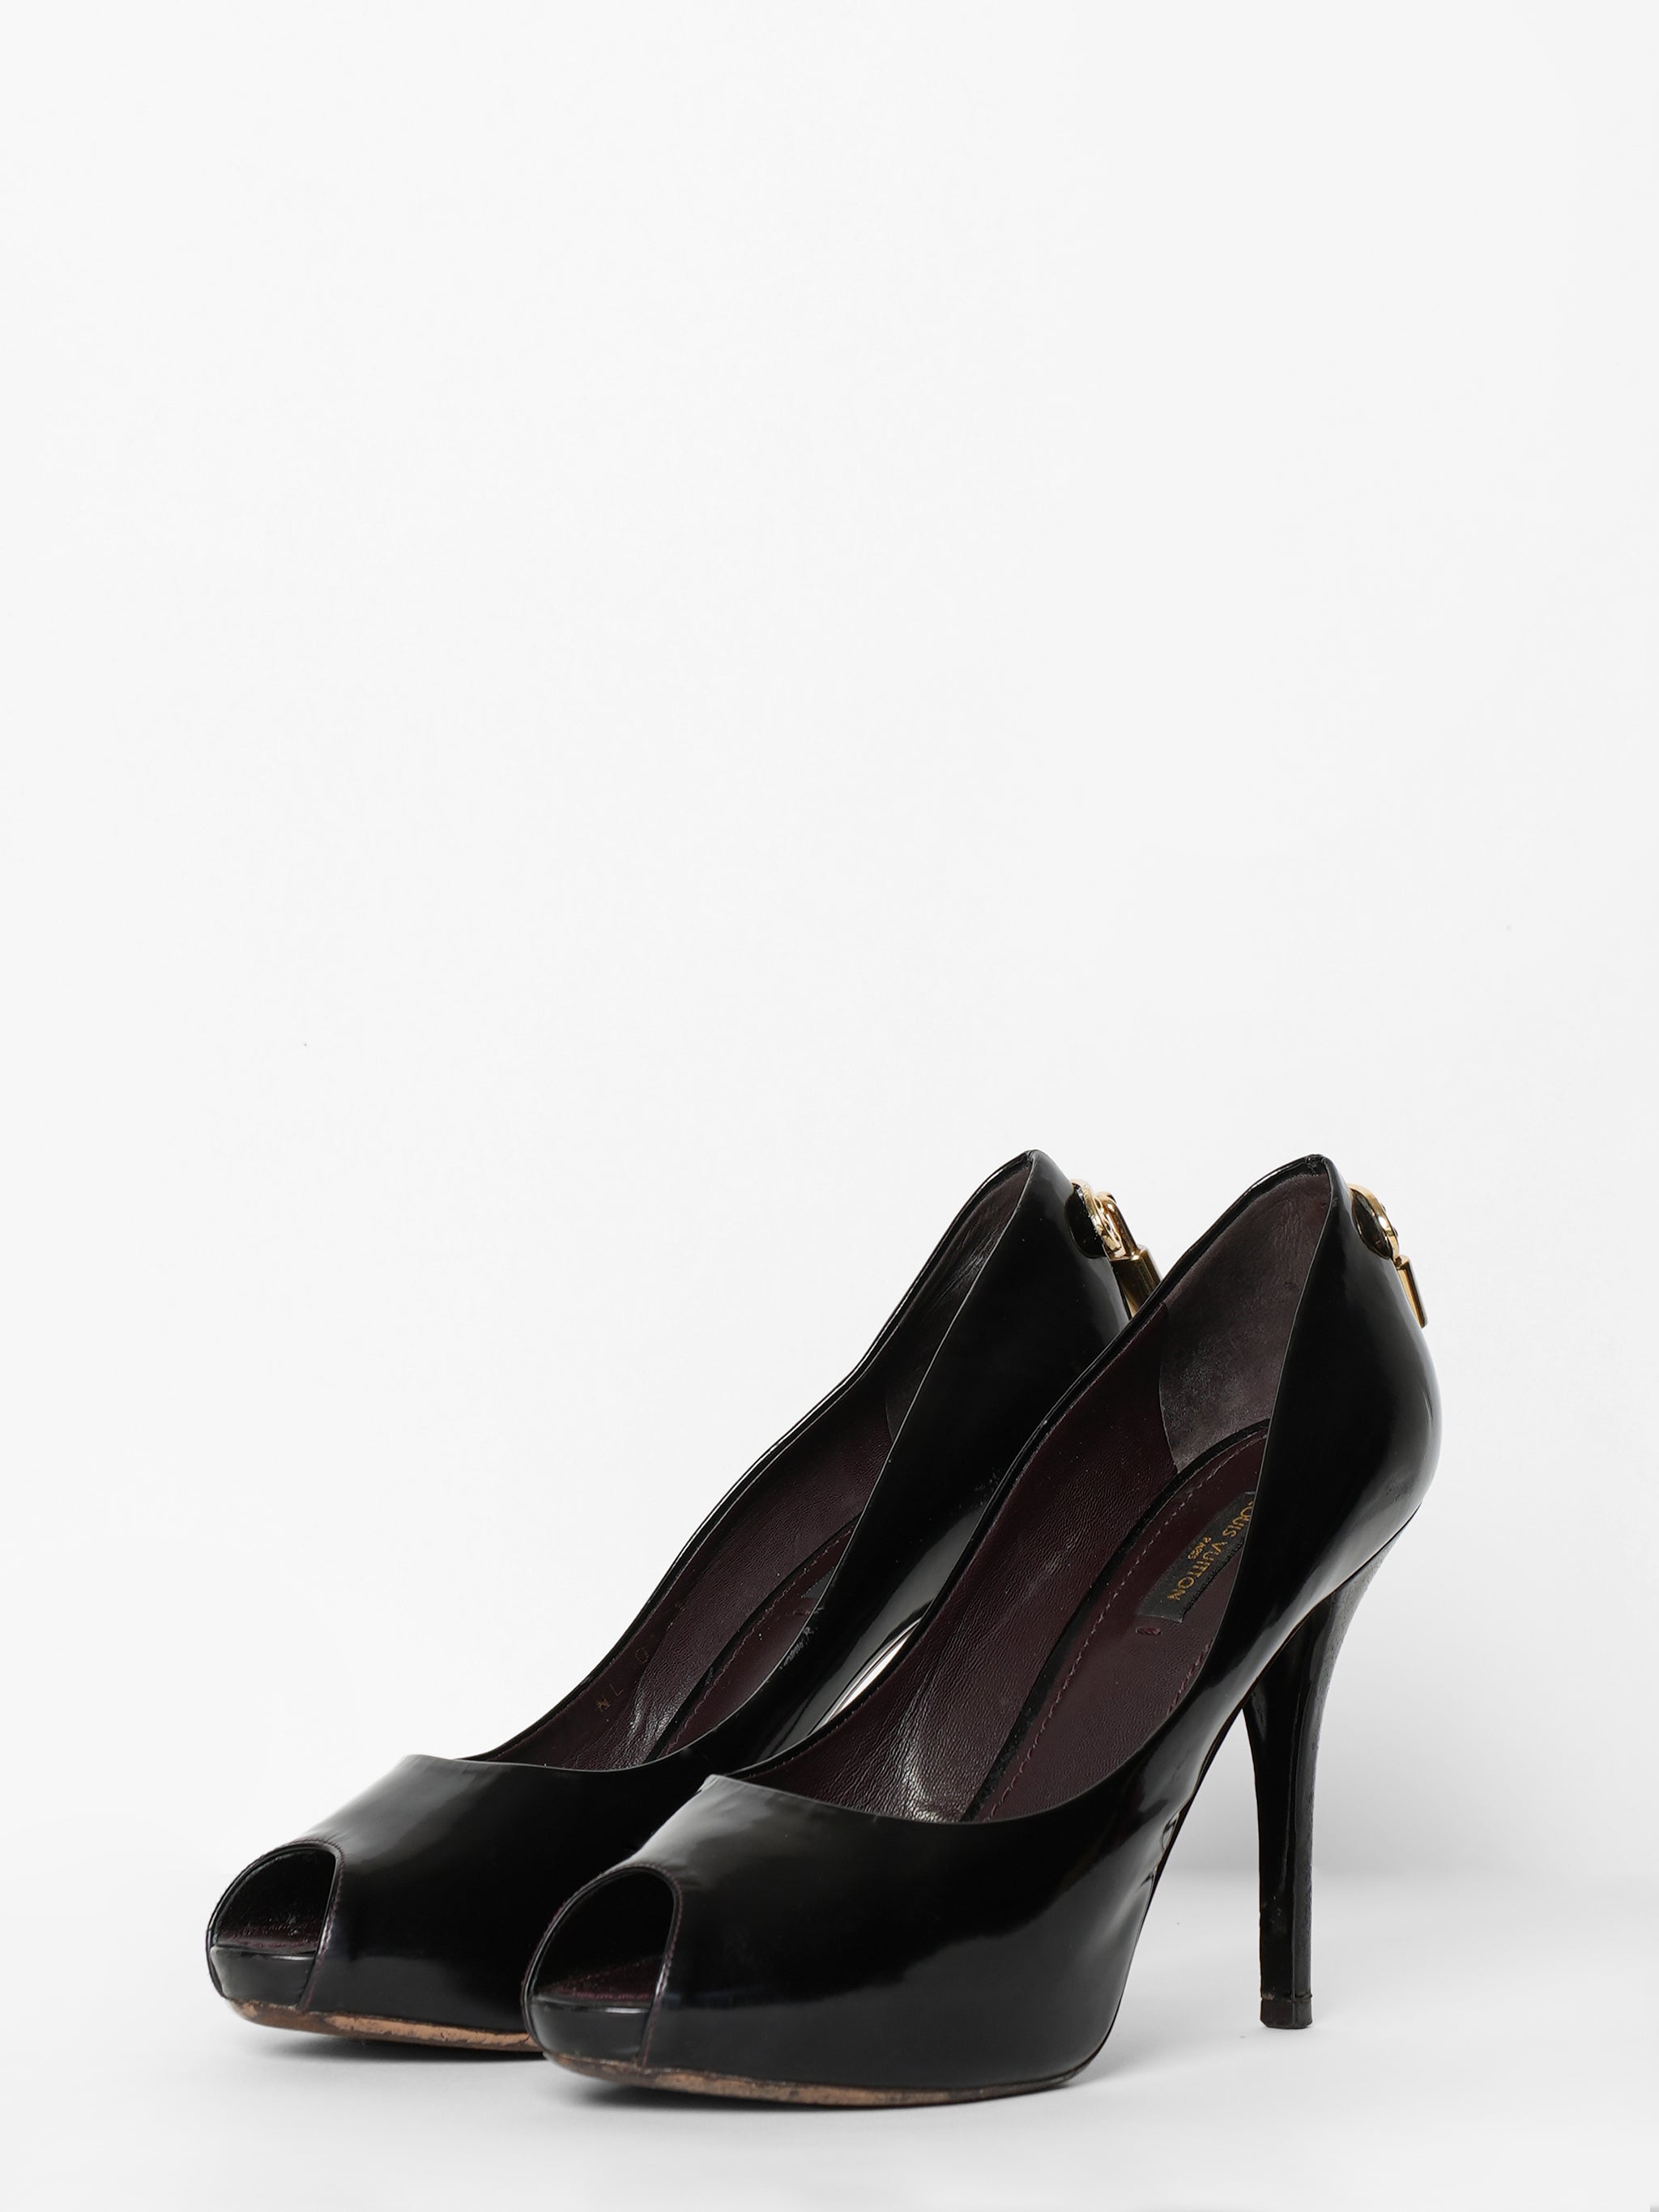 Louis Vuitton Burgundy Patent Leather Oh Really! Peep Toe Pumps